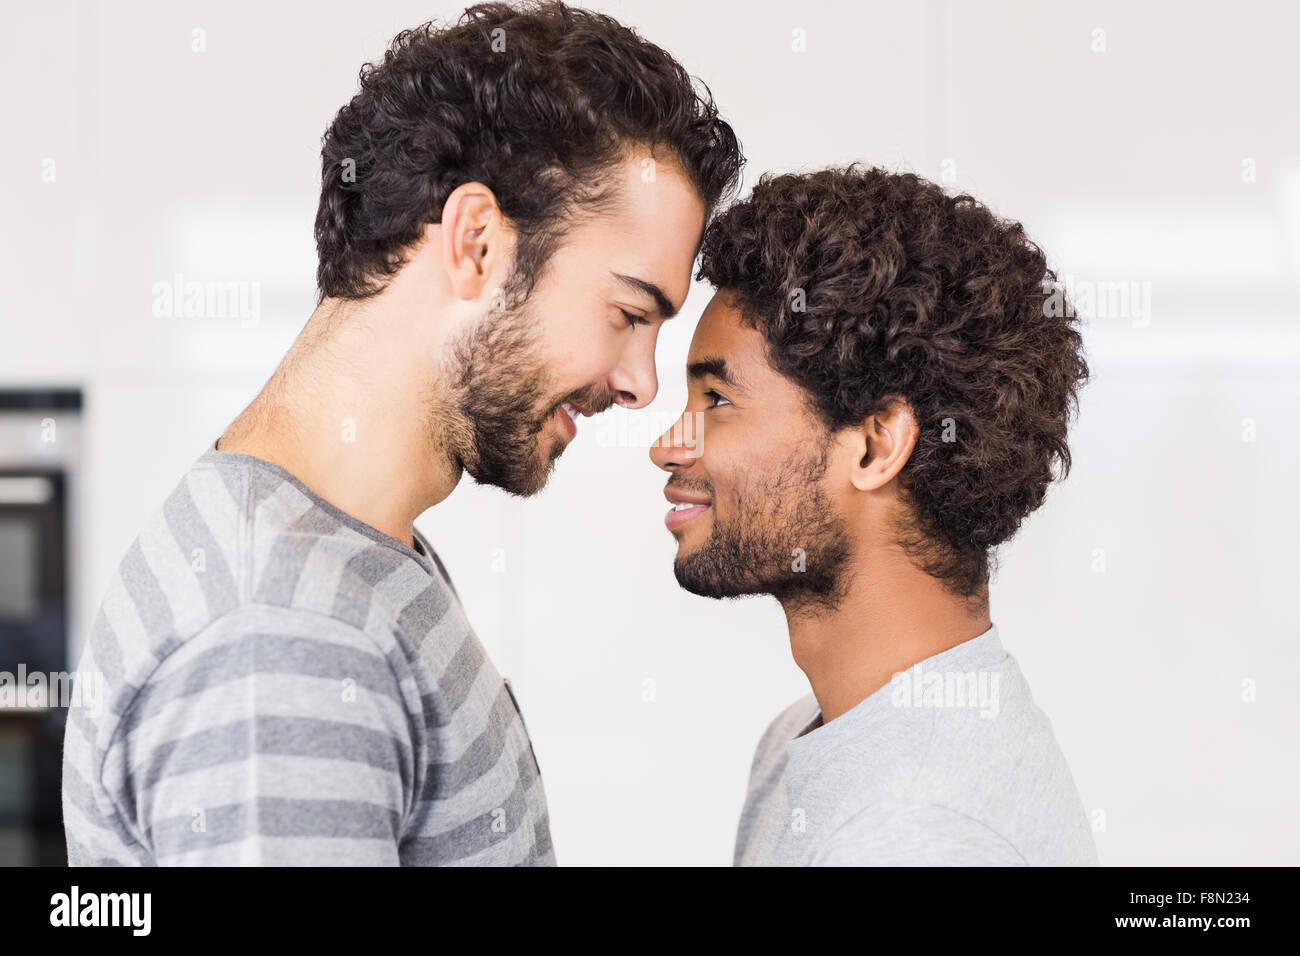 Smiling gay couple looking to each other Stock Photo